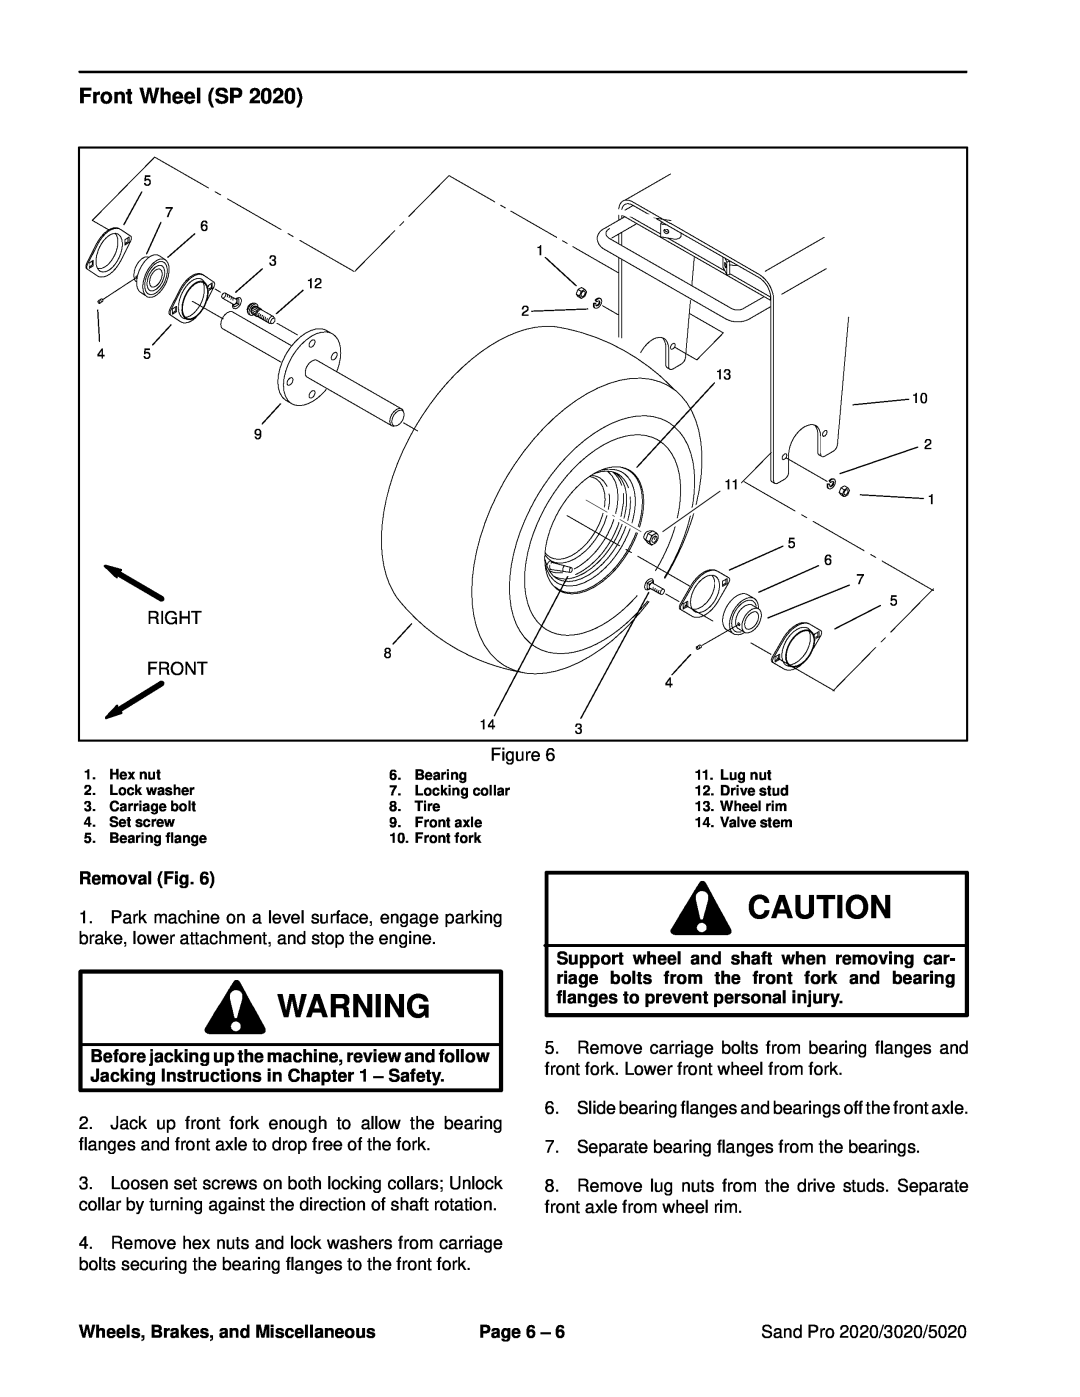 Toro service manual Front Wheel SP, Removal Fig, Wheels, Brakes, and Miscellaneous, Page 6, Sand Pro 2020/3020/5020 